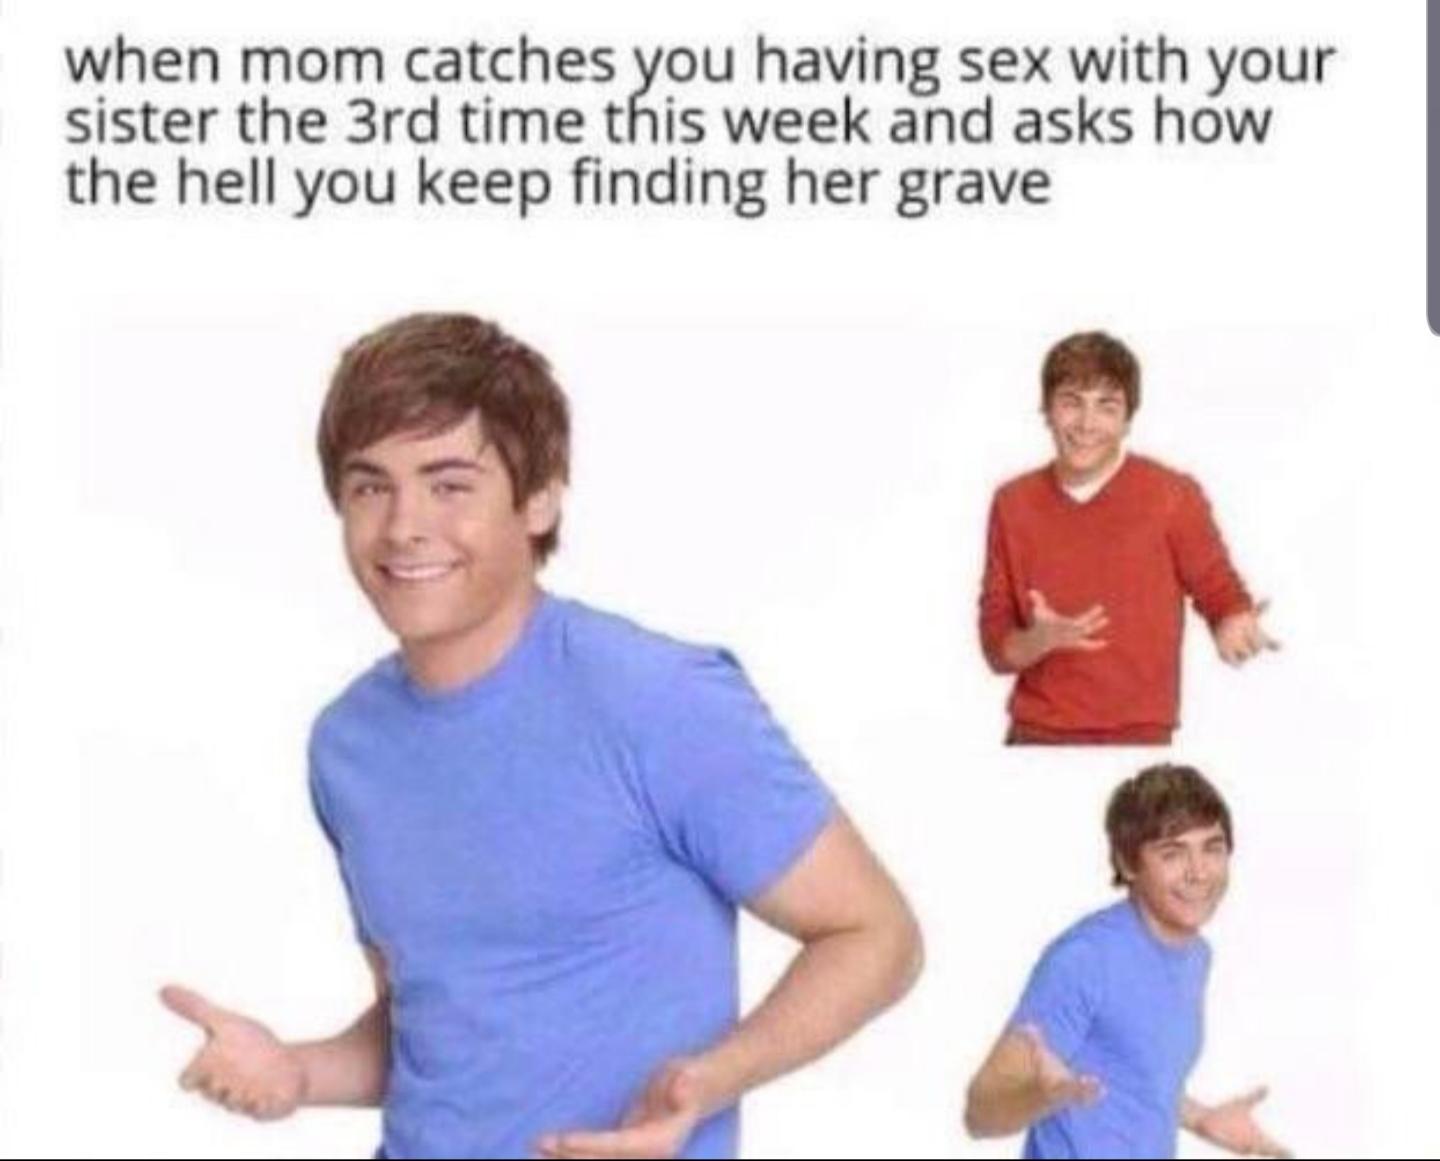 Meme - when mom catches you having sex with your sister the 3rd time this week and asks how the hell you keep finding her grave